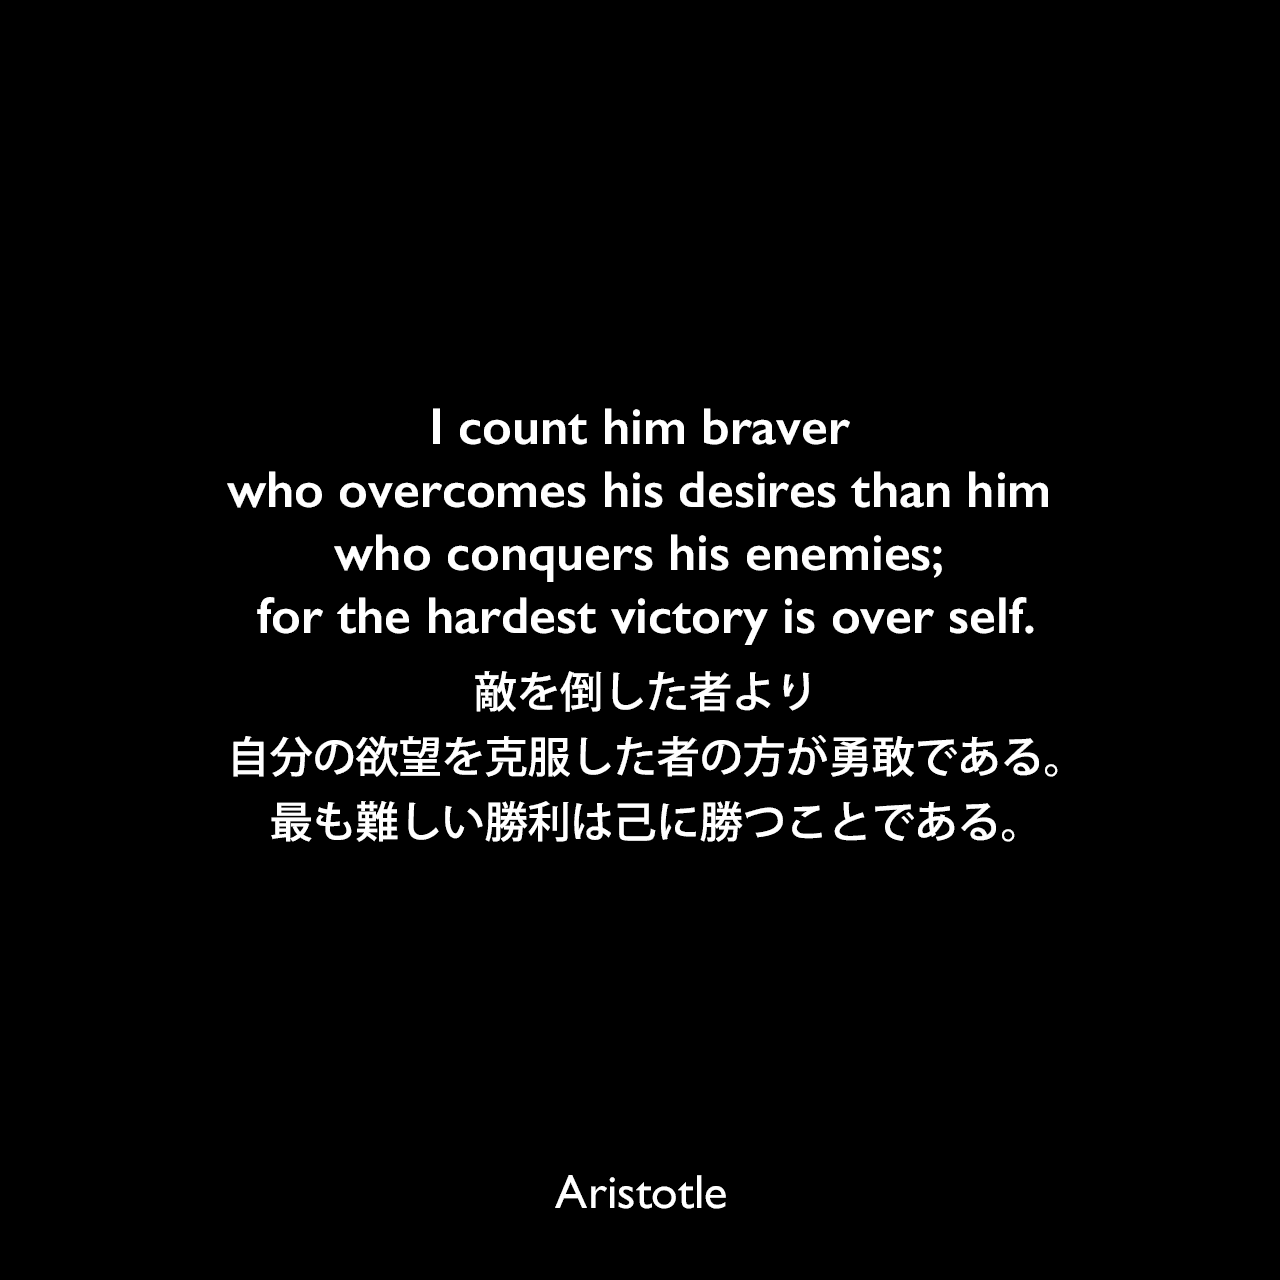 I count him braver who overcomes his desires than him who conquers his enemies; for the hardest victory is over self.敵を倒した者より、自分の欲望を克服した者の方が勇敢である。最も難しい勝利は己に勝つことである。Aristotle